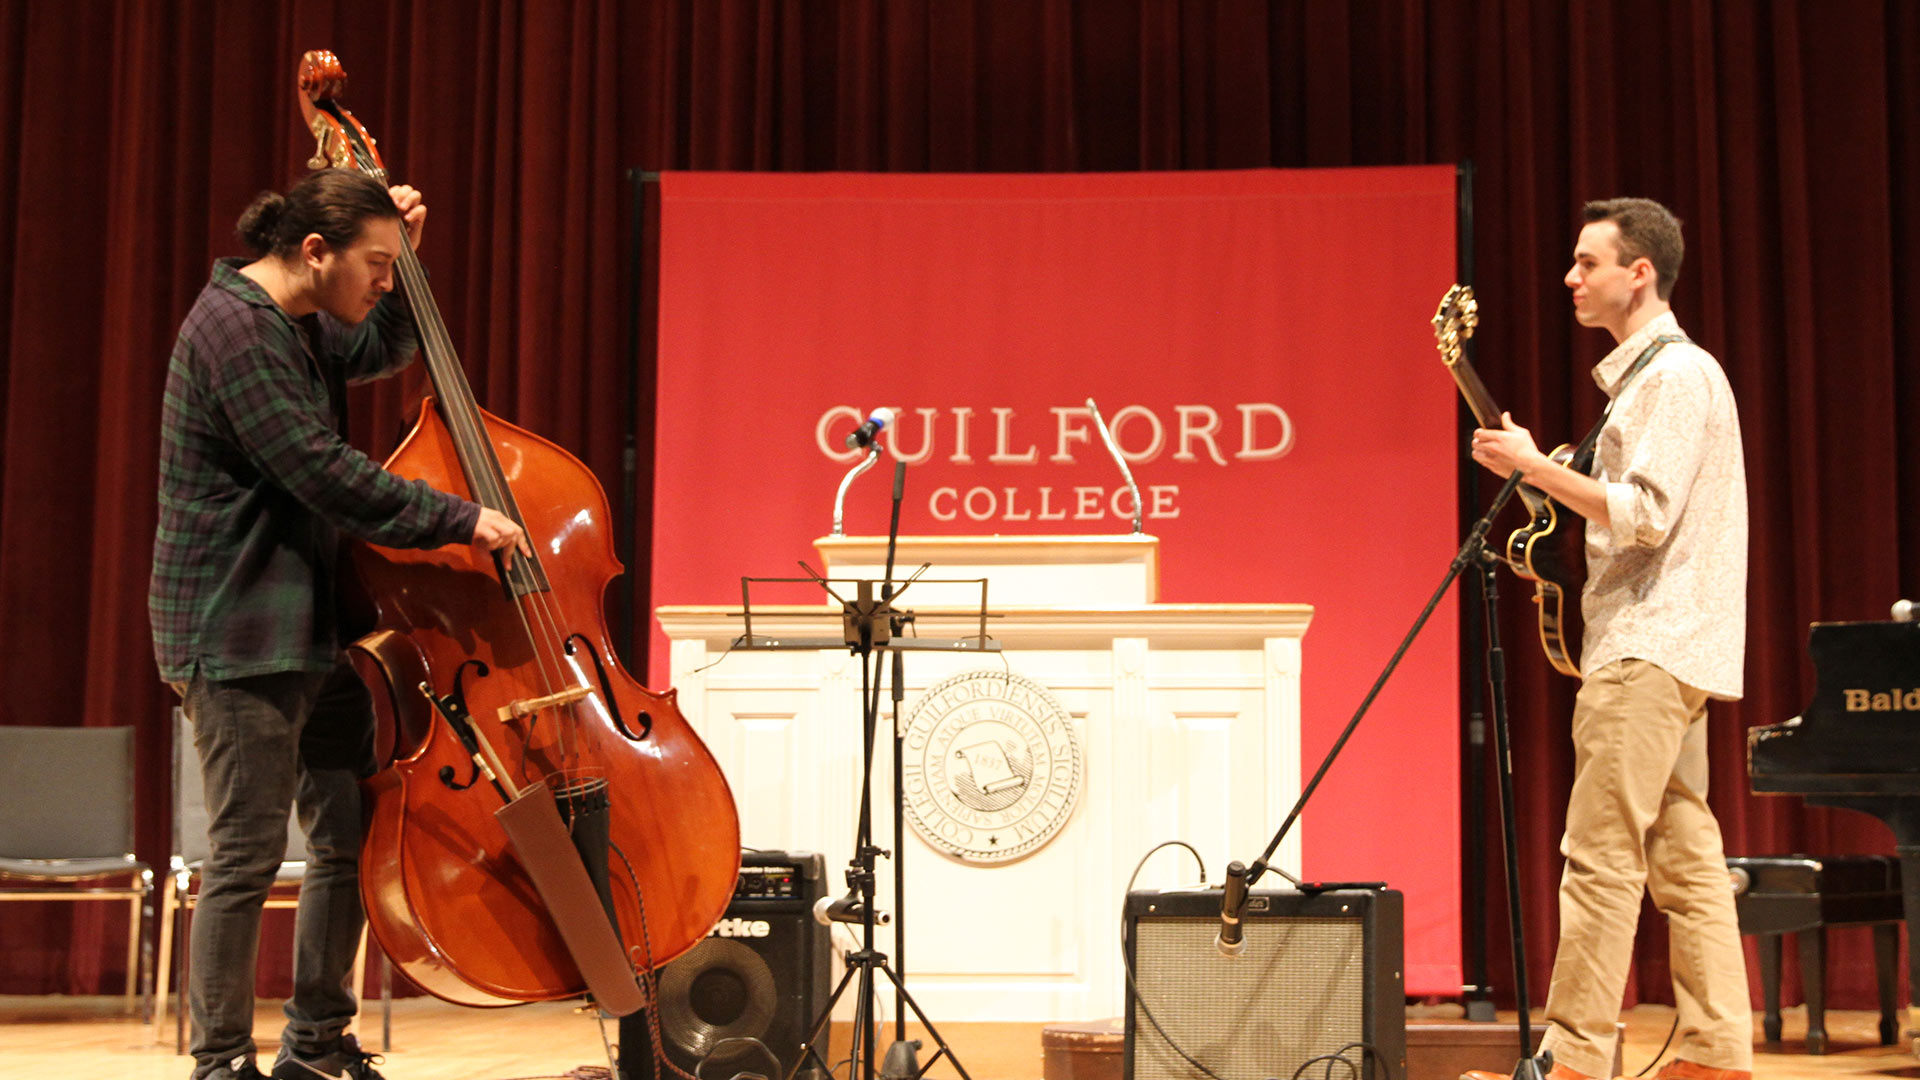 Brandon Walker '22 (left) and Emmett Edwards '23 perform on the upright bass and guitar before Convocation begins.